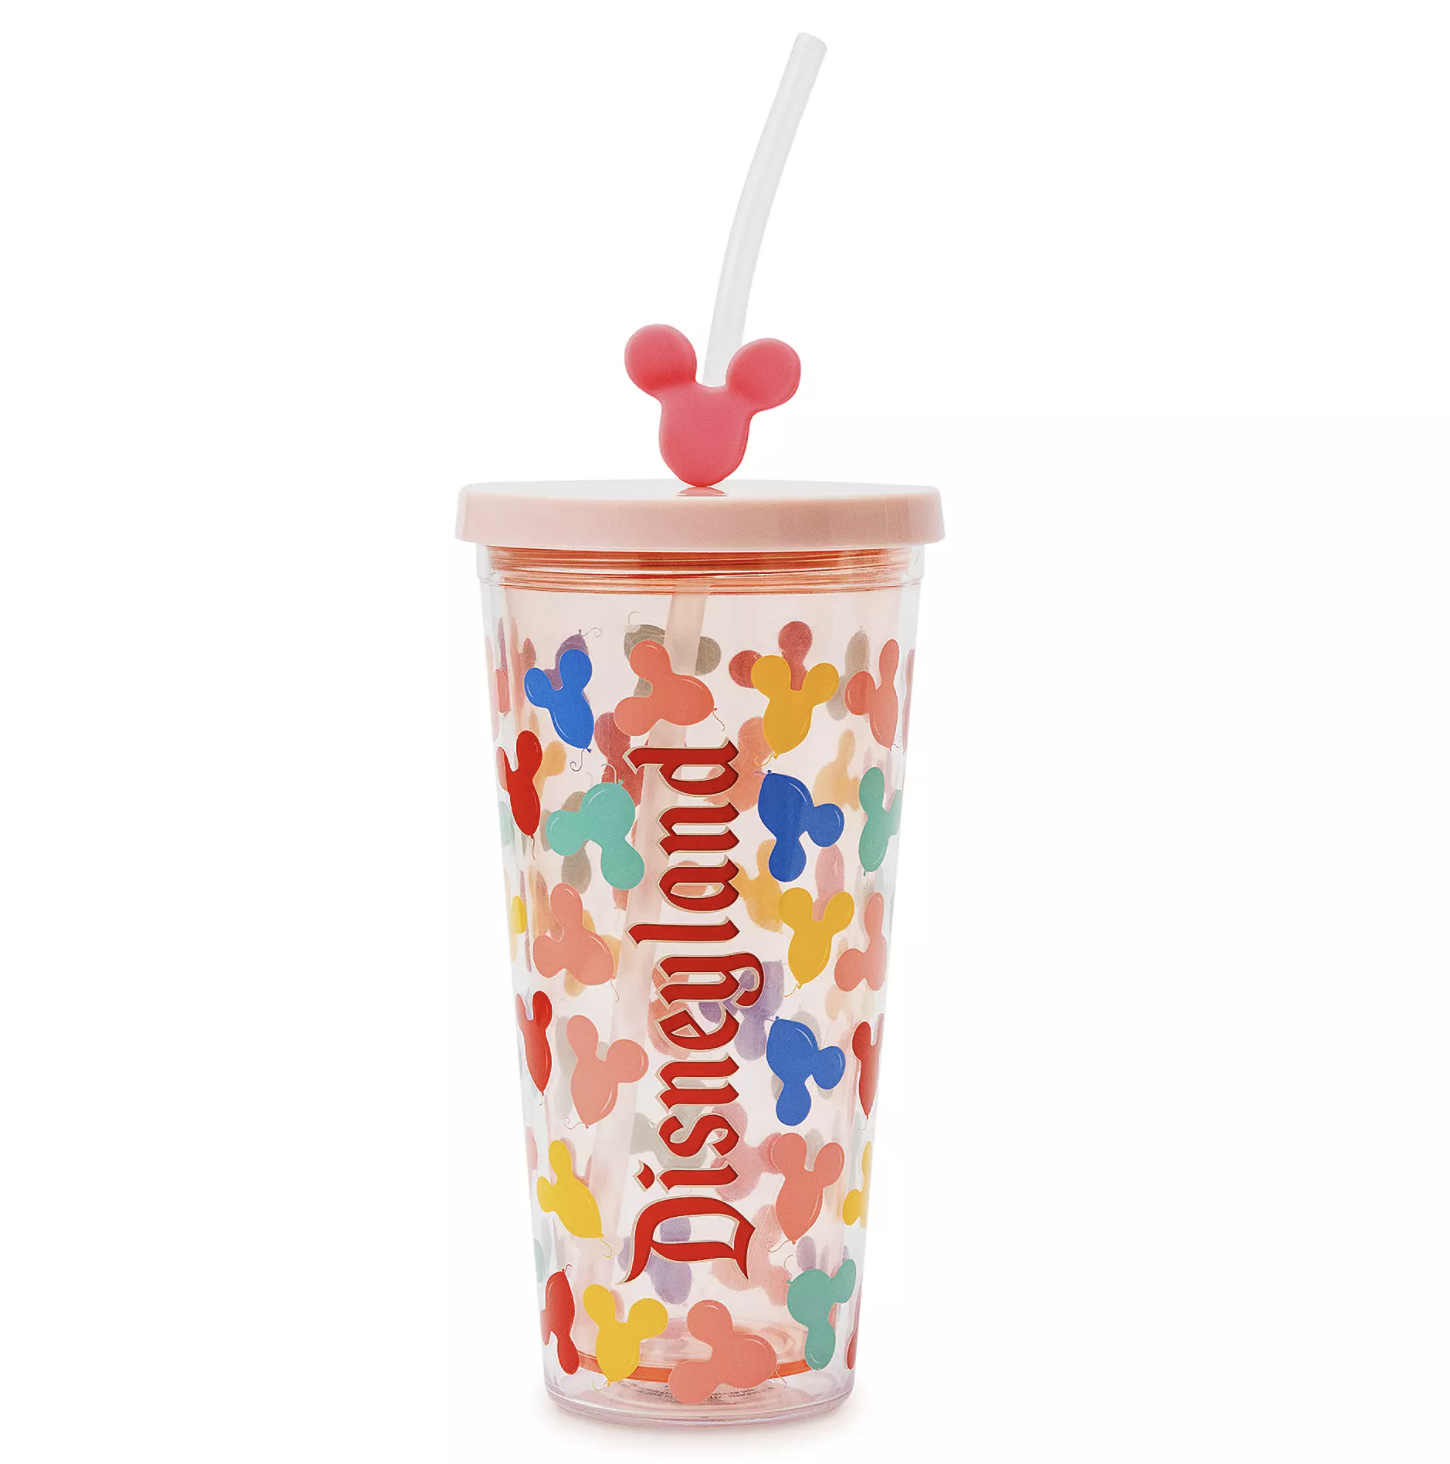 https://allears.net/wp-content/uploads/2021/02/2021-shopdisney-mickey-mouse-balloons-travel-tumbler-disneyland.png